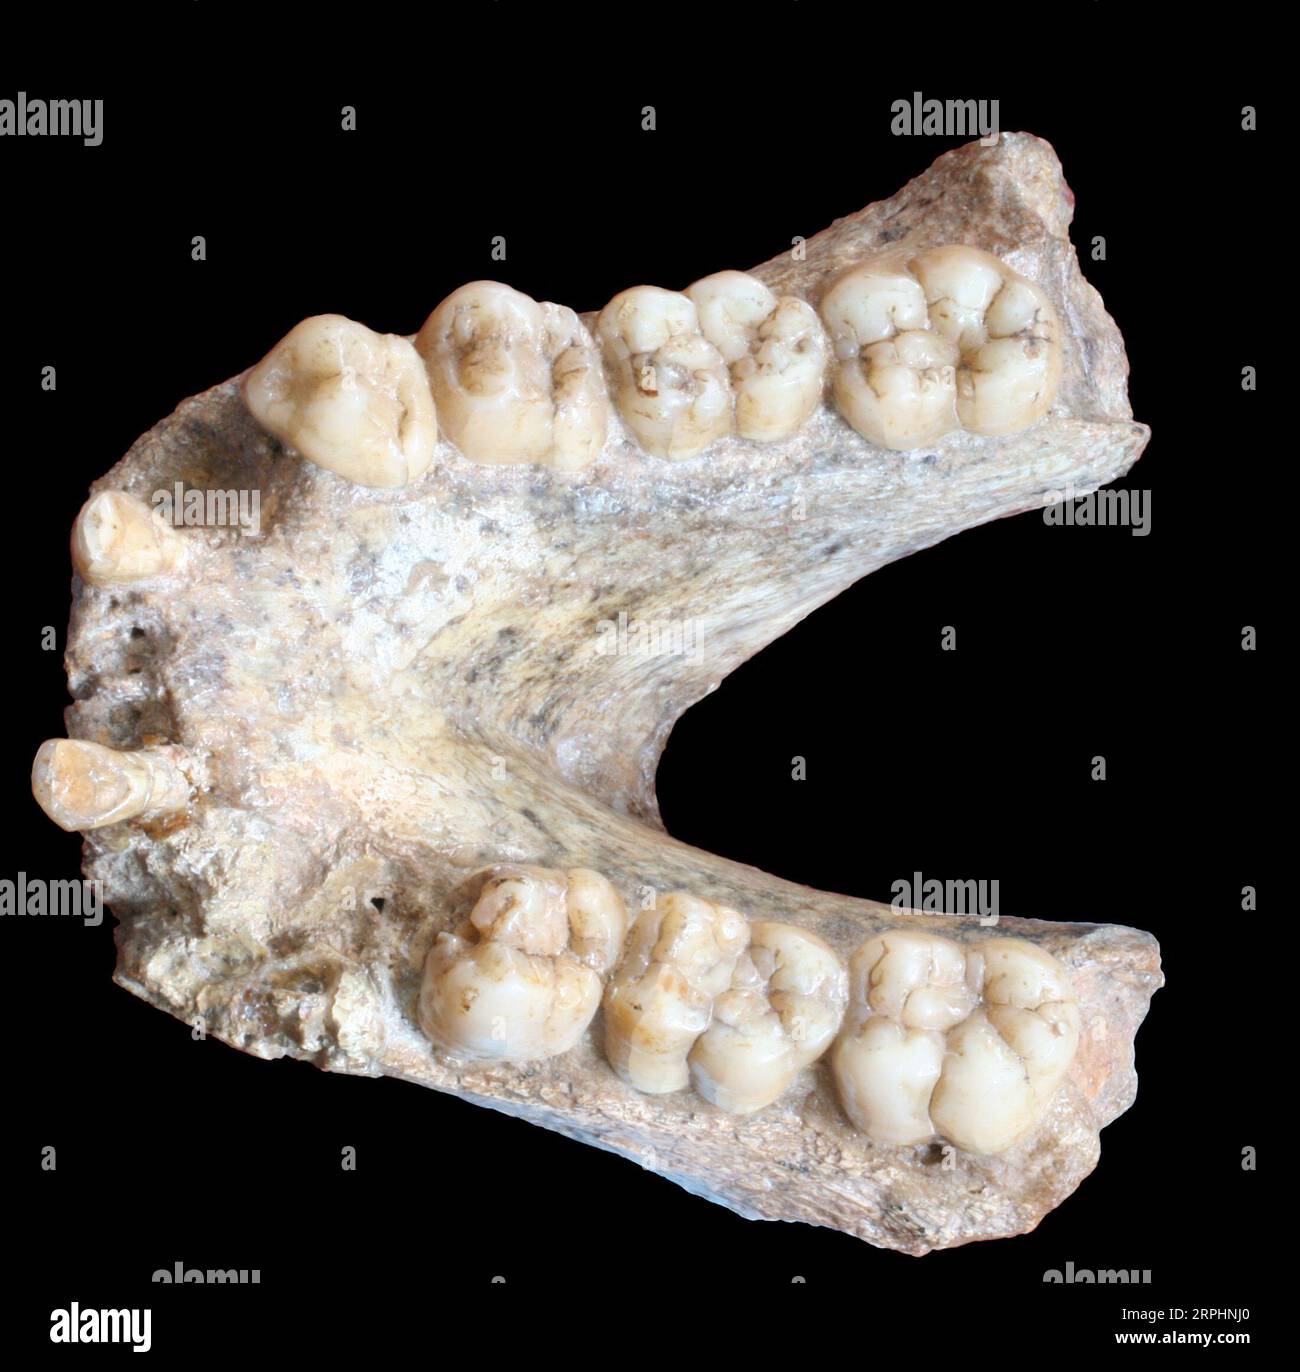 191114 -- NANNING, Nov. 14, 2019 Xinhua -- Undated file photo shows a 1.9-million-year-old fossil of mandible of Gigantopithecus blacki found in a cave in Tiandong County of south China s Guangxi Zhuang Autonomous Region. Chinese and Danish scientists have successfully retrieved genetic materials from a 1.9-million-year-old fossil of Gigantopithecus blacki, a species of great ape. The finding, published in a paper on the journal Nature on Wednesday, marks the first time that such ancient protein evidence from fossils in the subtropics was retrieved. Scientists said it sheds new light on the or Stock Photo